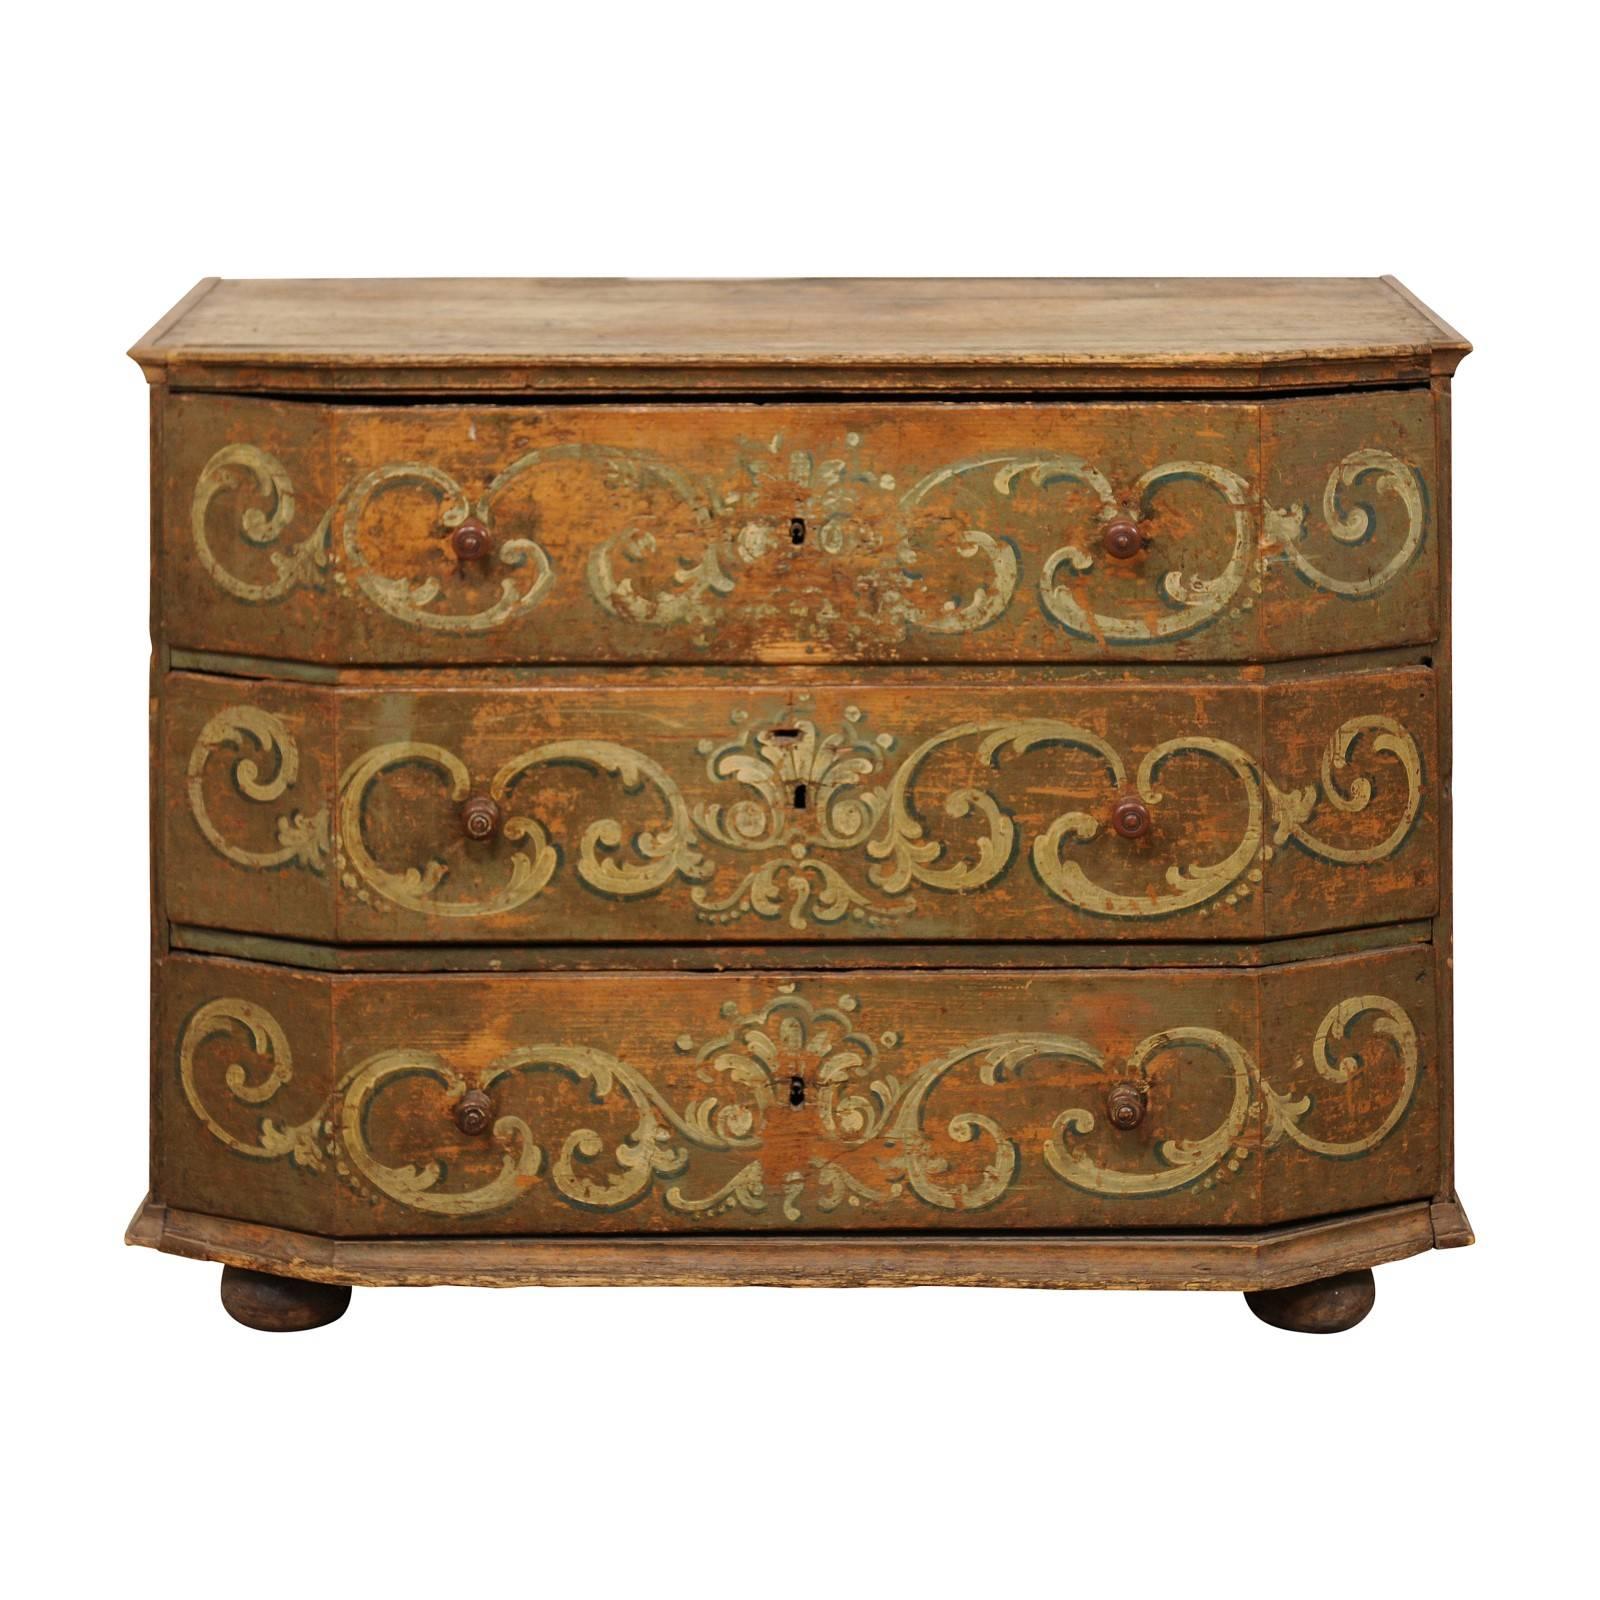 A Large 18th Century Beautifully Hand-Painted Wood Three-Drawer Commode, Italy 